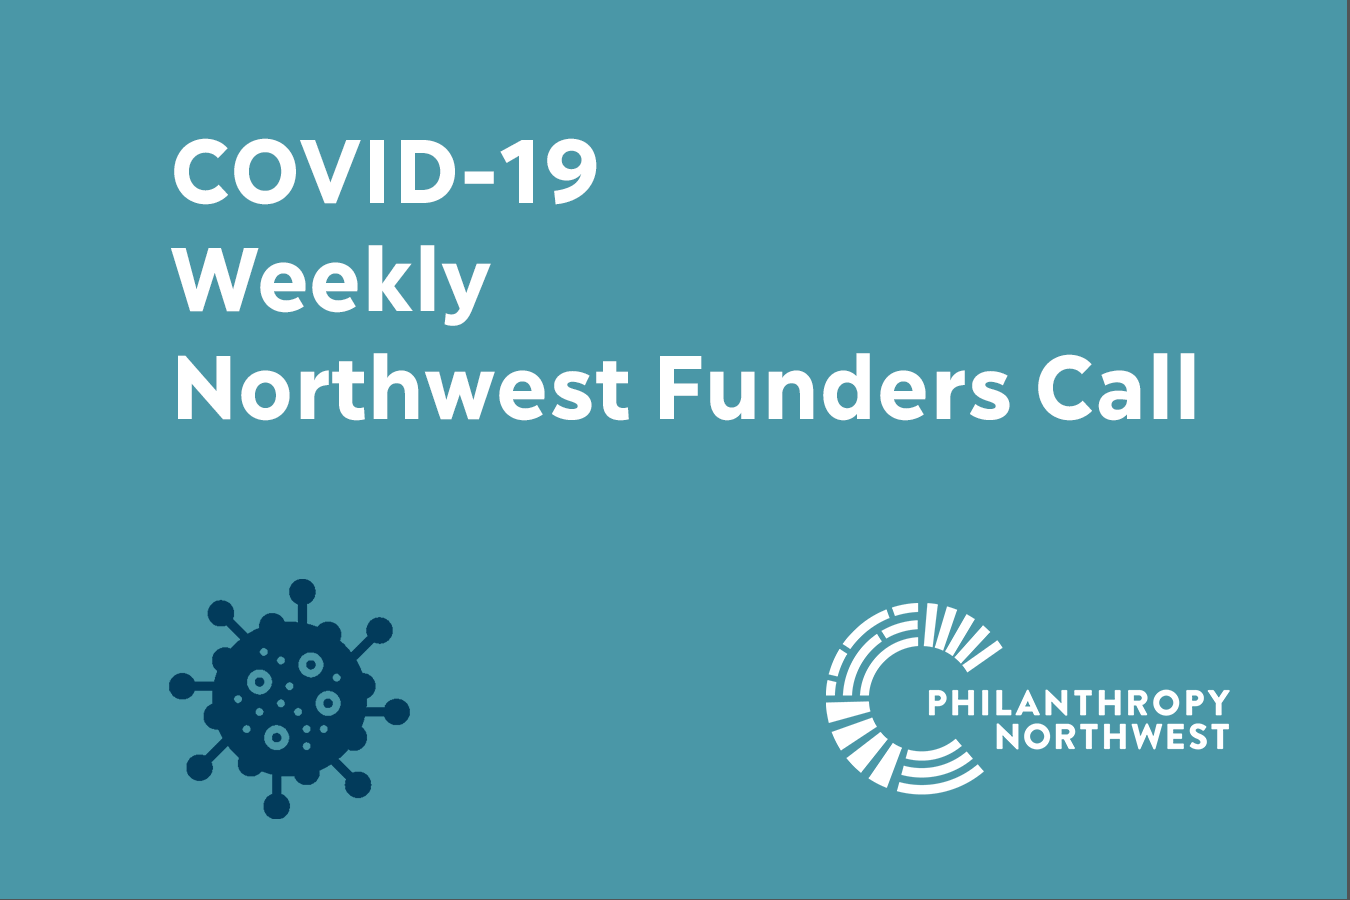 Event Banner for COVID-19 Weekly Northwest Funders Call with virus icon and Philanthropy Northwest logo